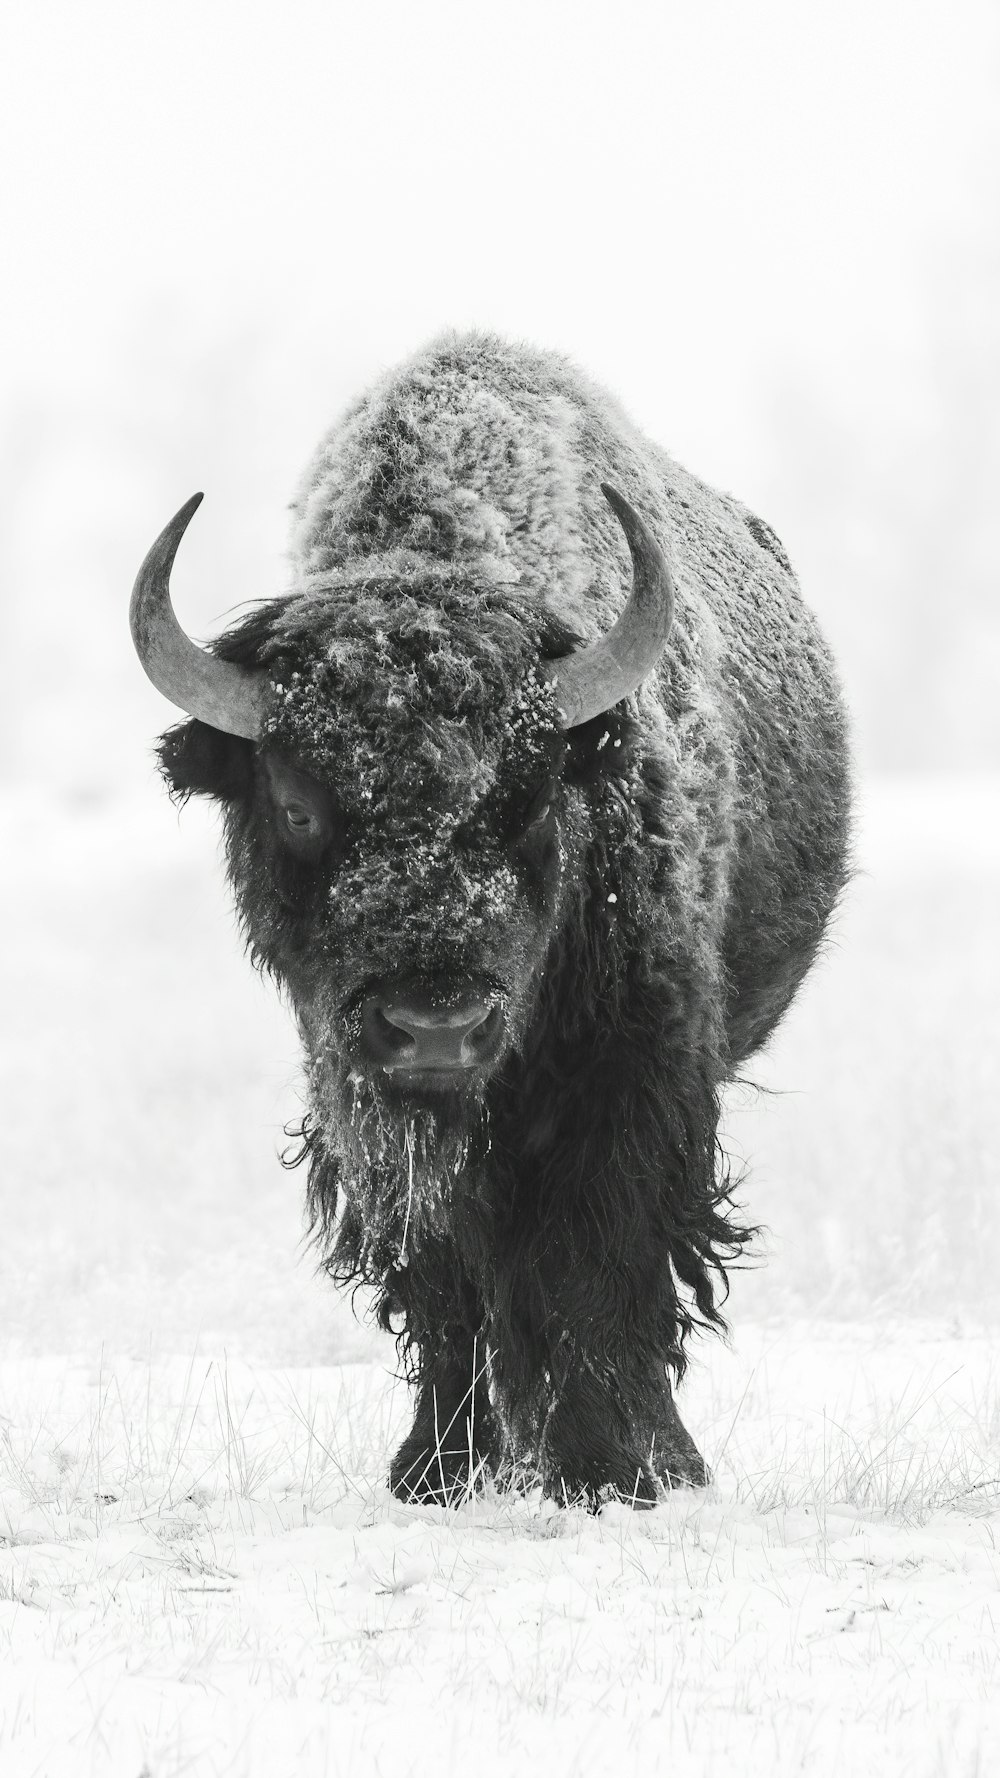 grayscale photo of bison on snow field